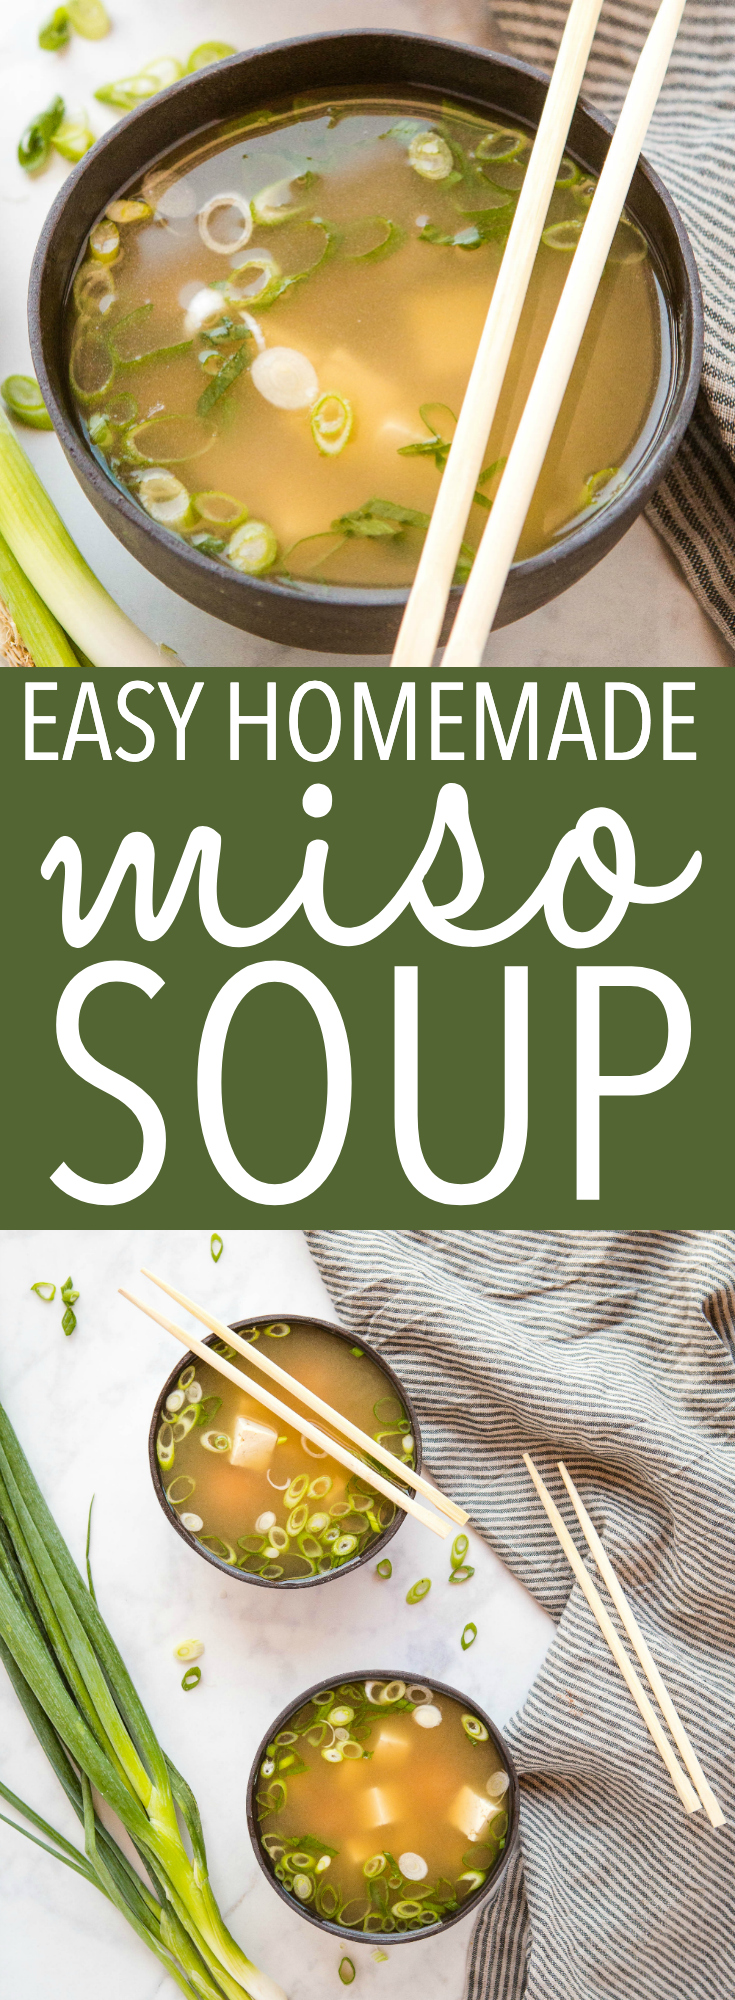 This Vegan Miso Soup is quick and easy to make, makes a great lunch and is a delicious addition to any Asian-style meal. Recipe from thebusybaker.ca! #veganmisosoup #misosoup #homemademisosoup #japanese #asian #soup #homemade #easy #recipe via @busybakerblog